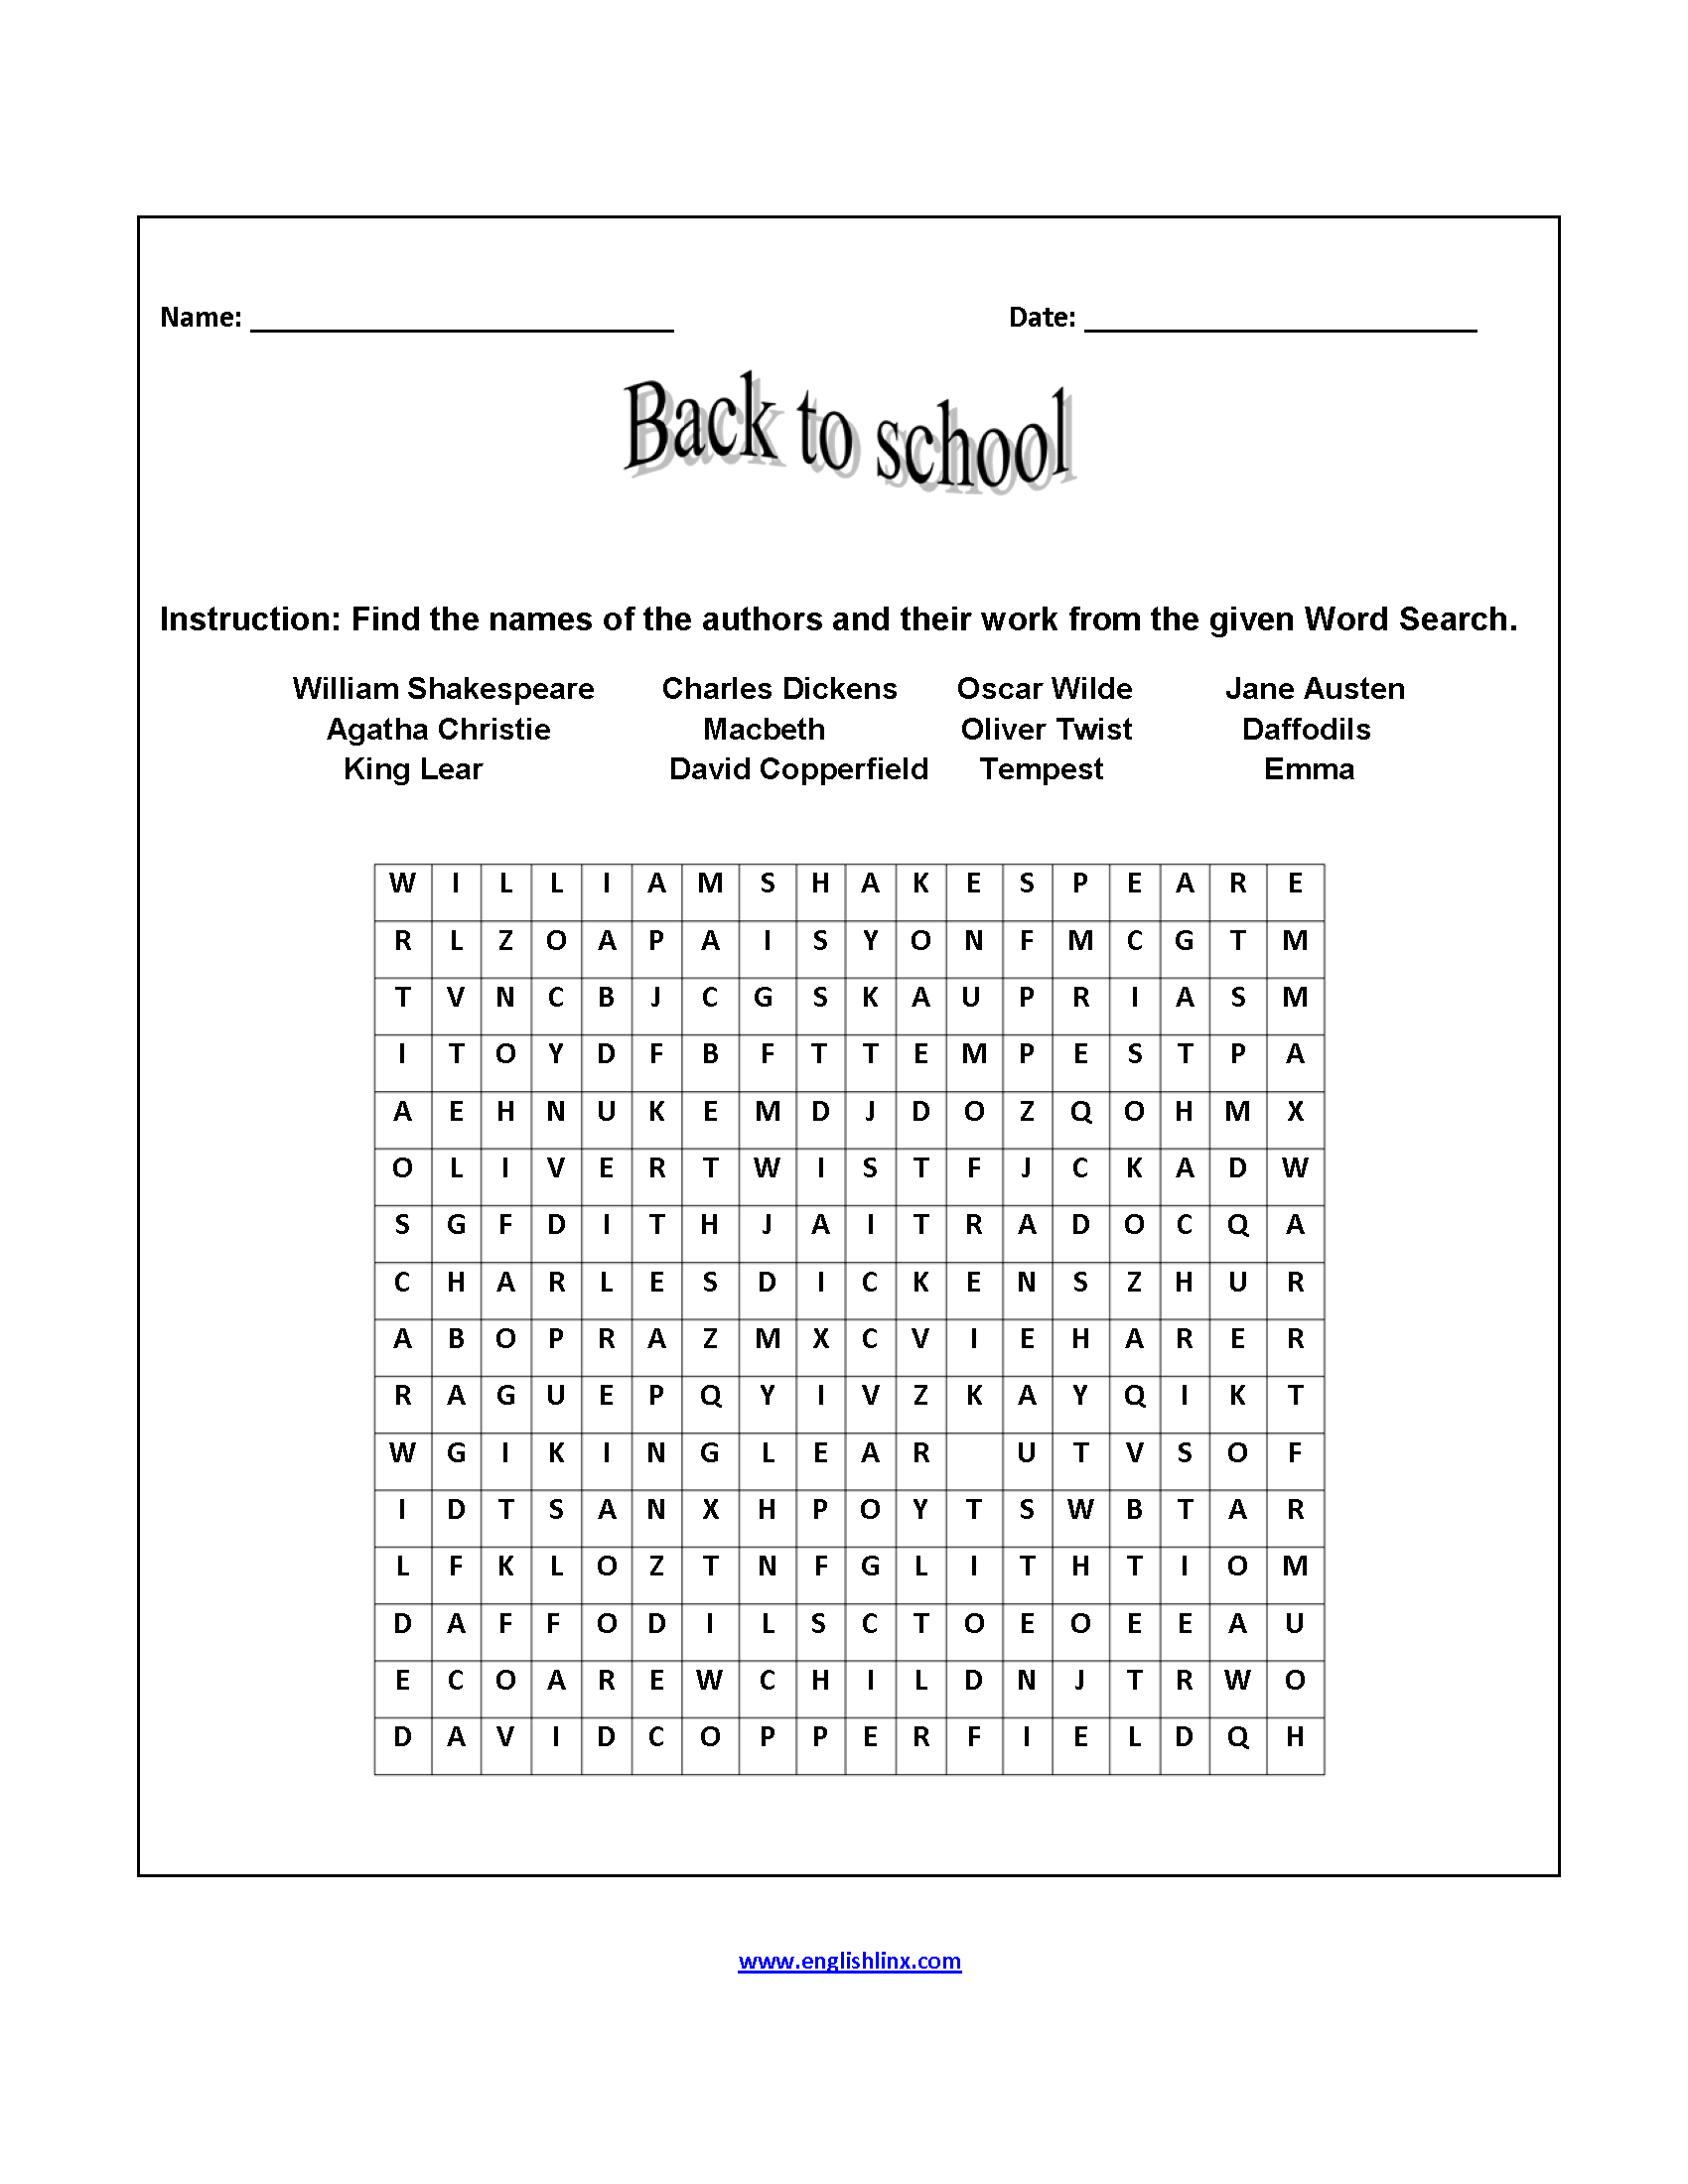 Back to School Worksheets | Word Search Back to School Worksheets